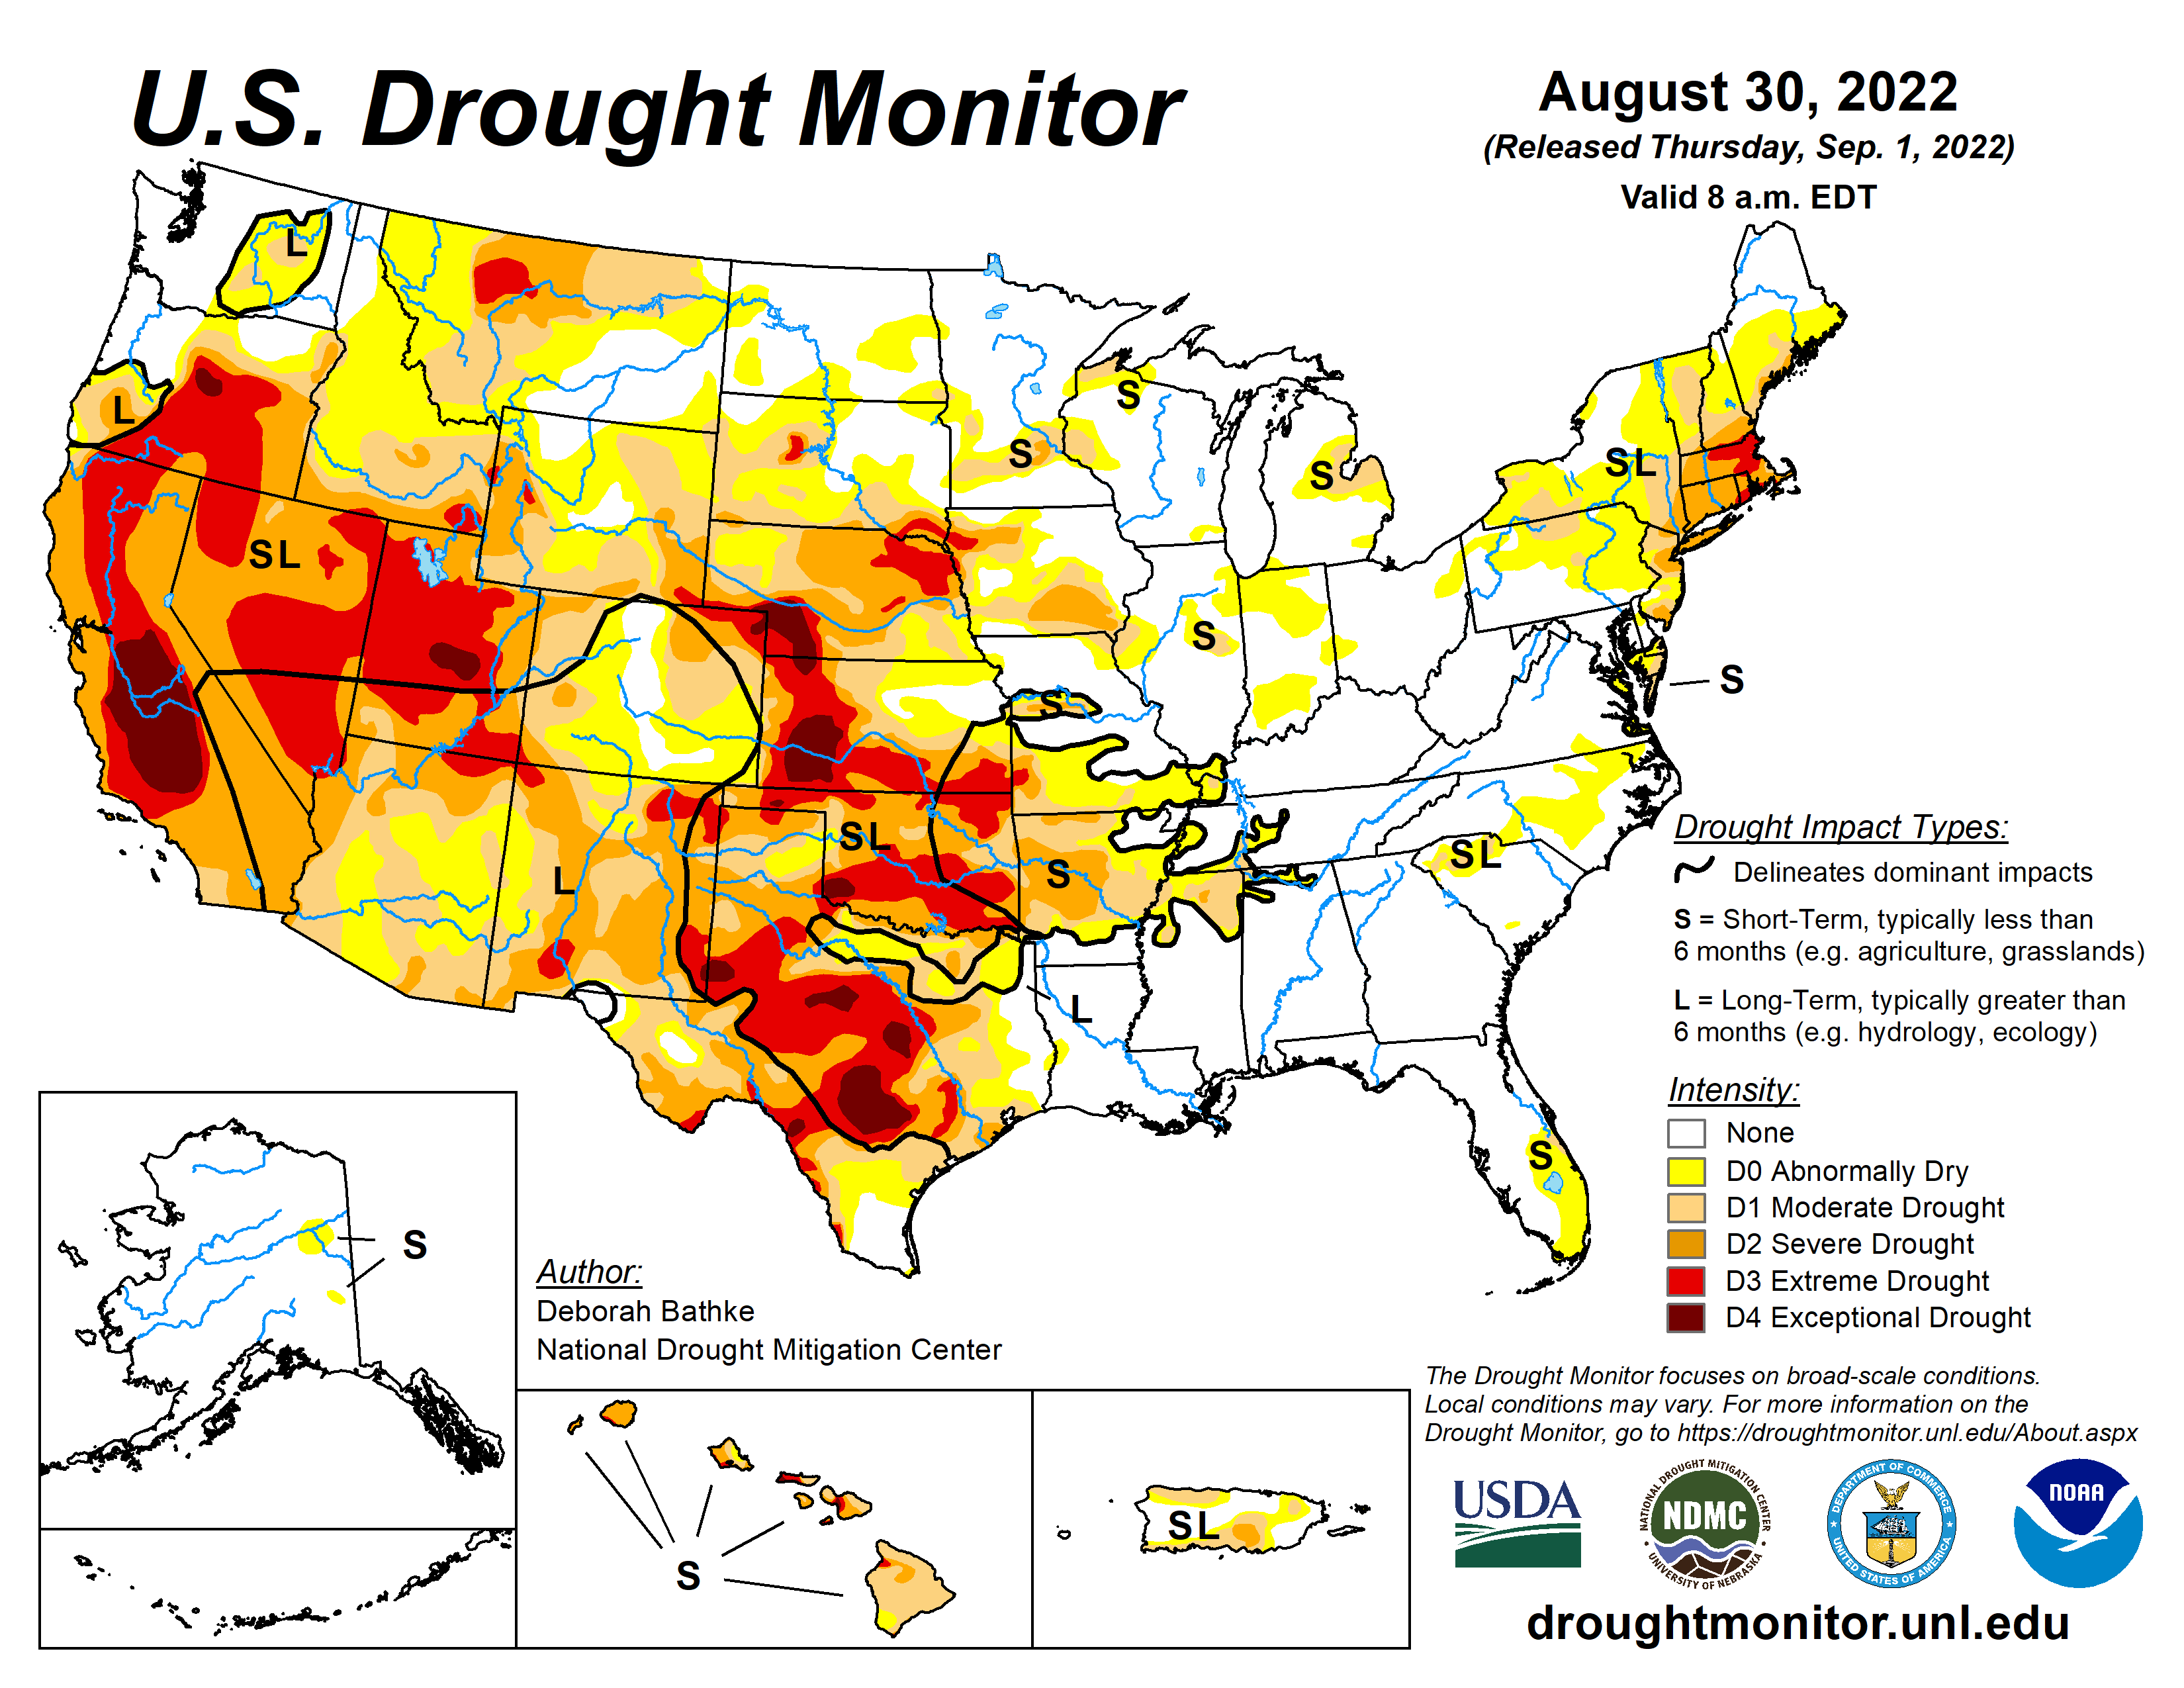 U.S. Drought Monitor map for August 30, 2022. The map is shaded from white (no drought) to yellow (abnormally dry) to various shades of orange and red, ending in deep red (exceptional drought). Much of the western U.S. is shaded in yellow or darker colors. 